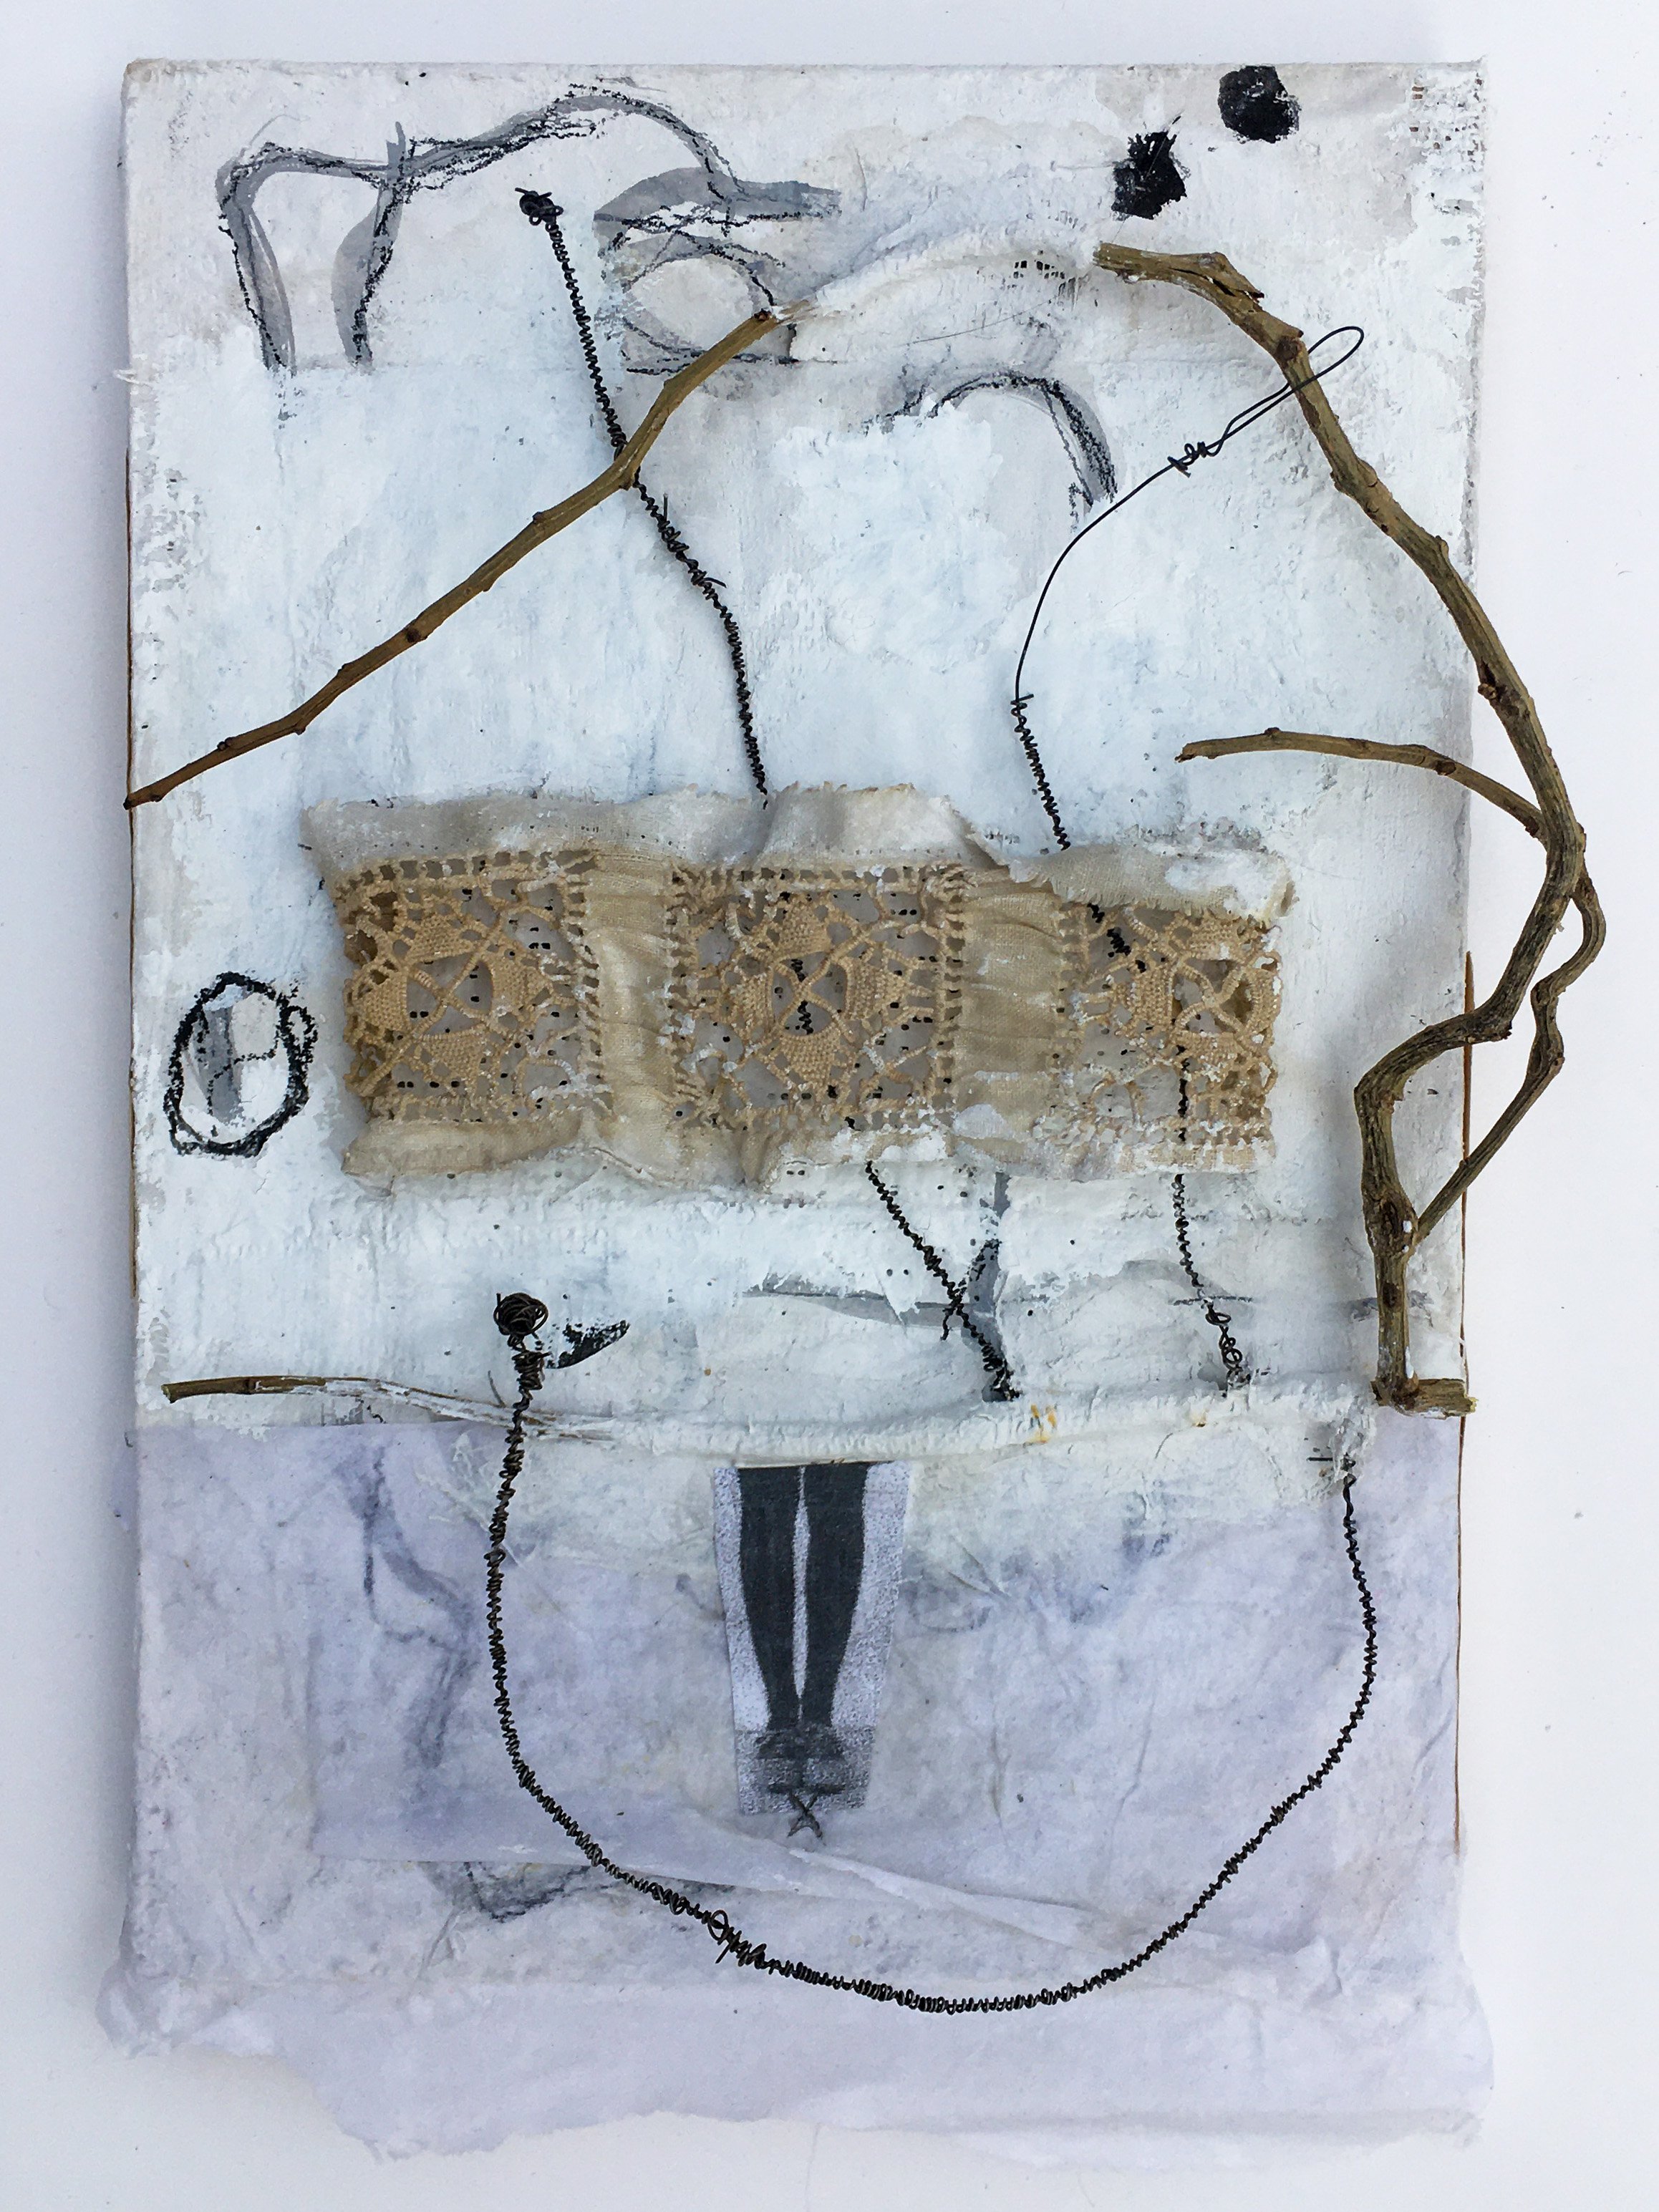   Other Sense , 2021. Plaster, roots, wire, lace cuff. 10” x 7” x 1.5”. Private collection. 